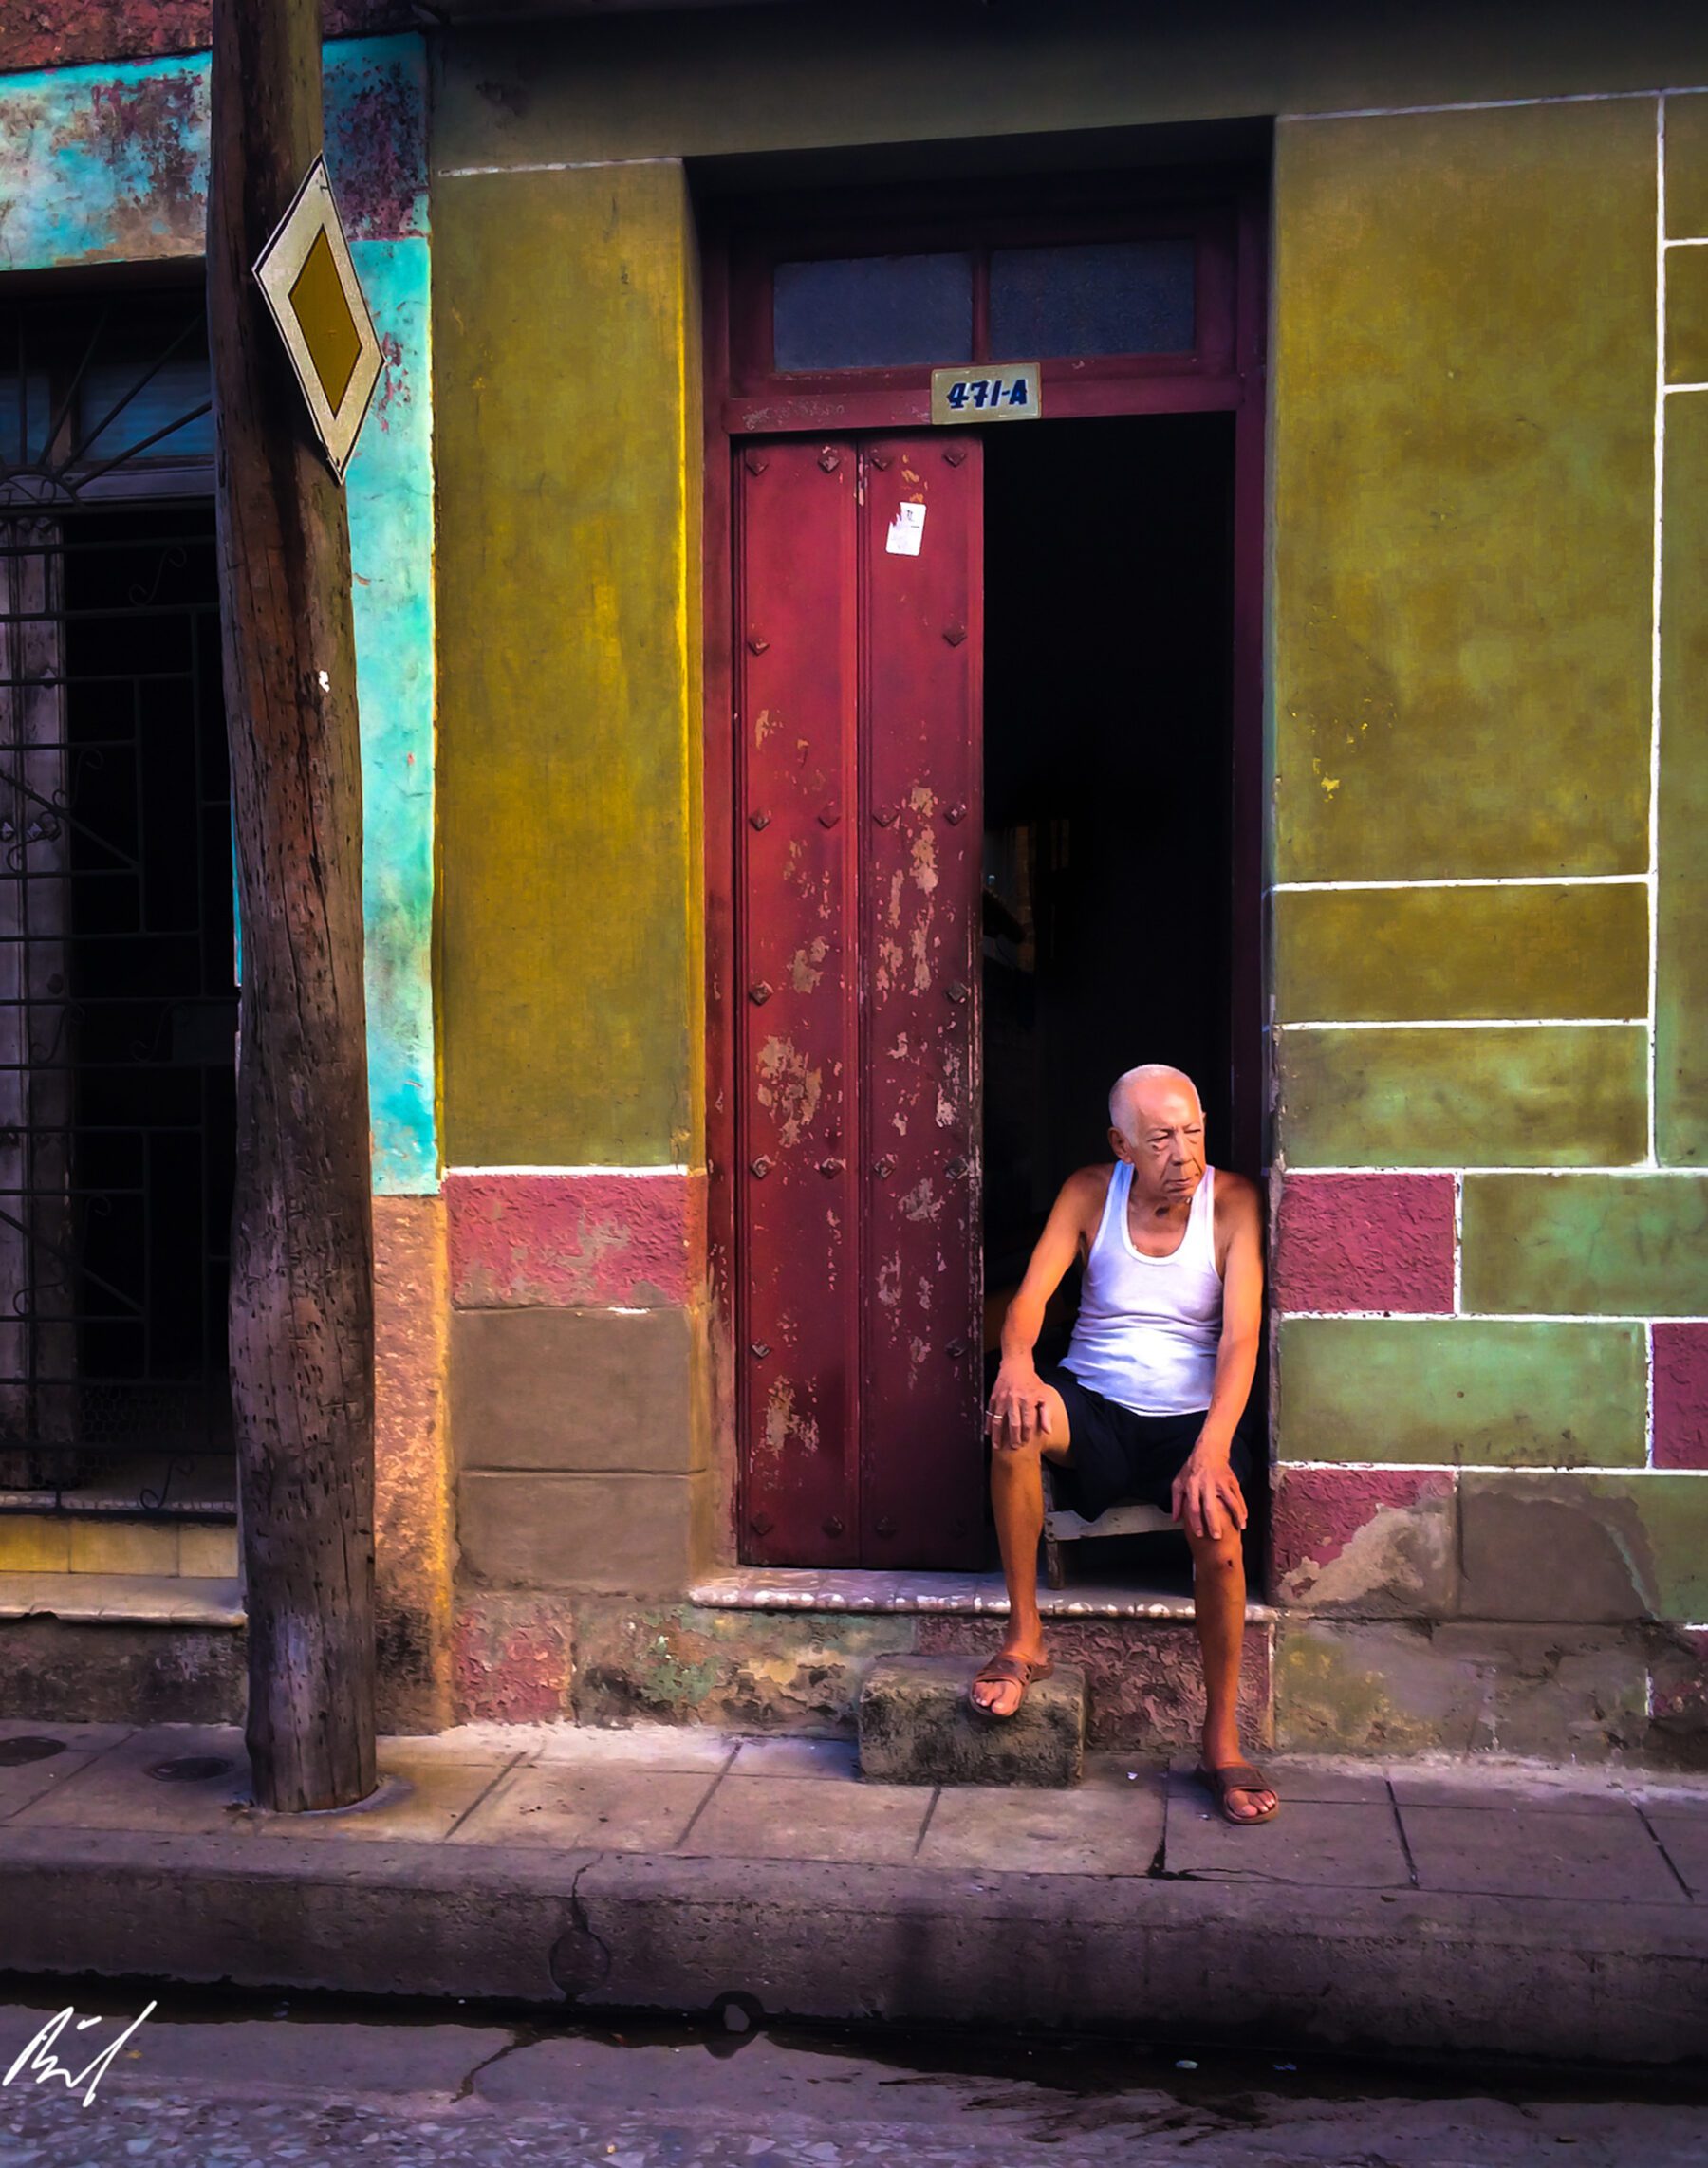 An old man sitting on the steps of Cuba.